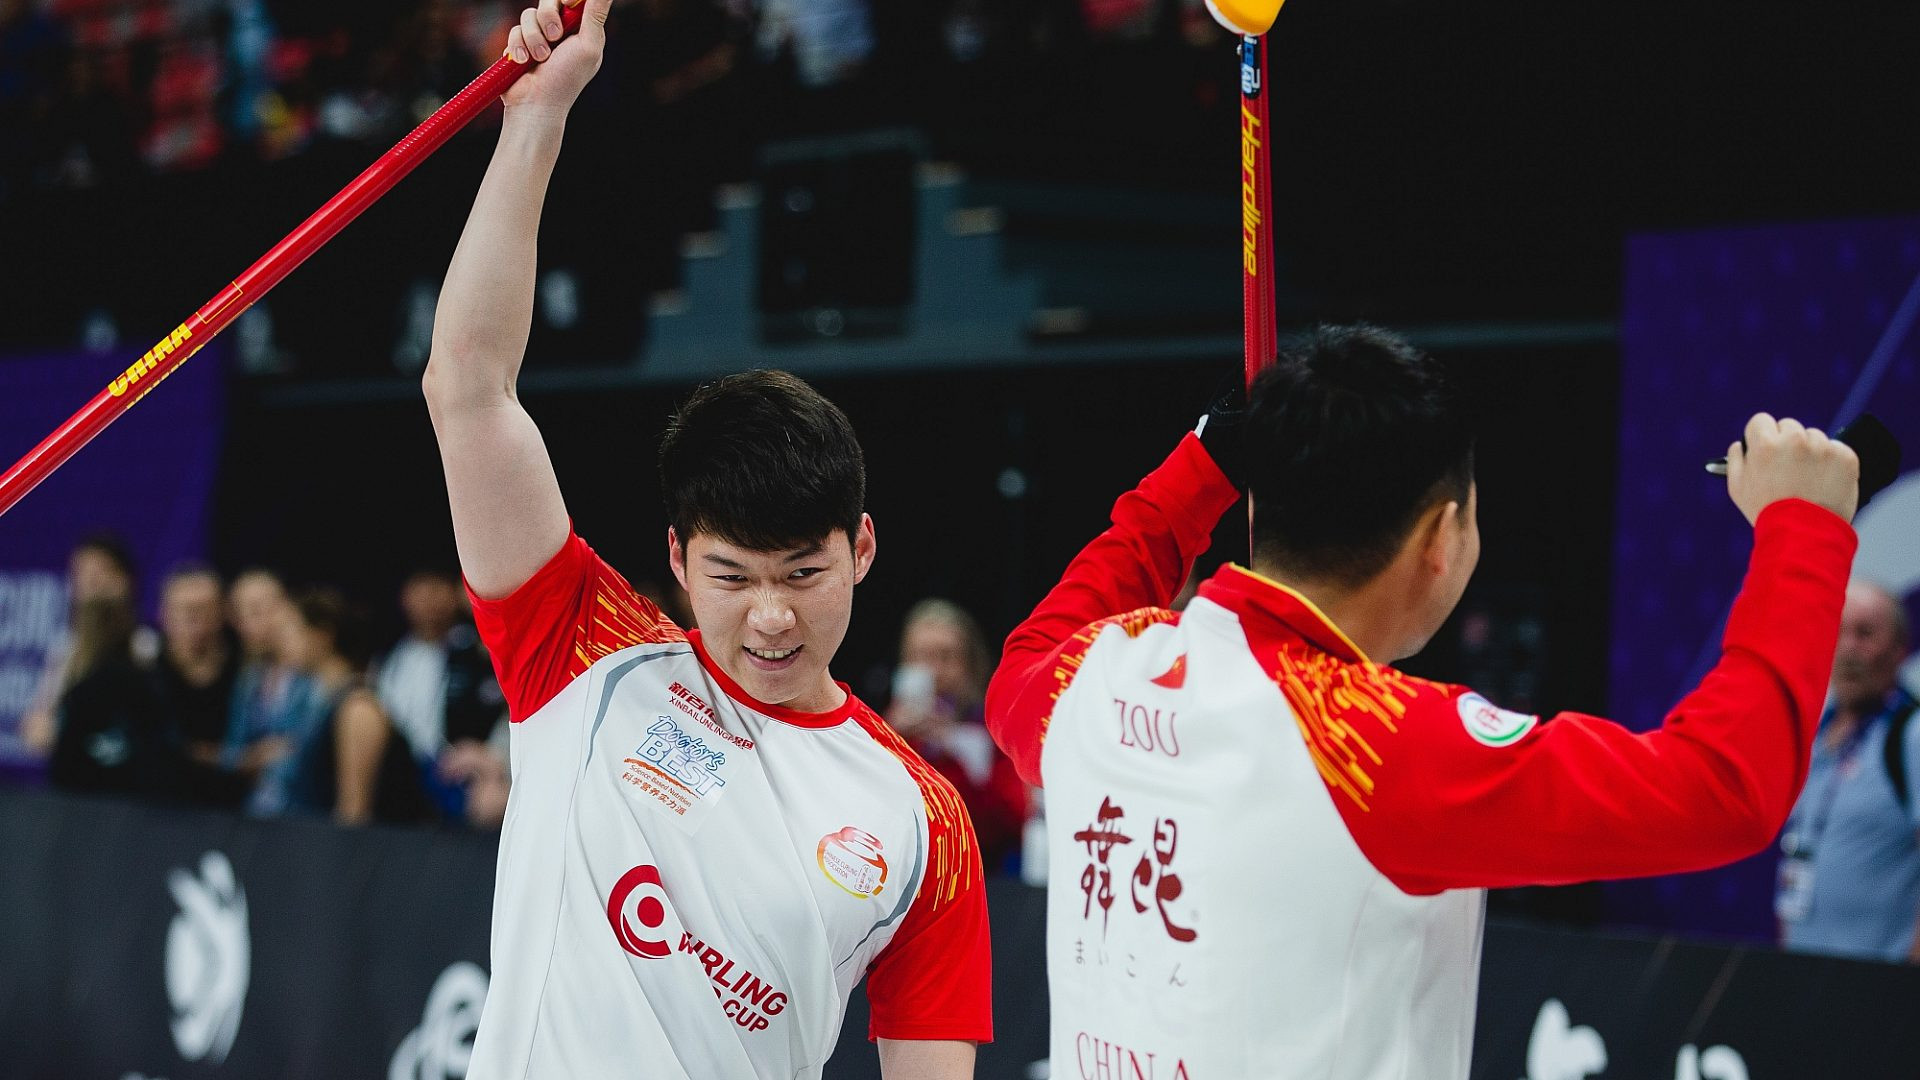 China earned huge acclaim as they reached the men's final at the Curling World Cup Grand Final in  Beijing ©World Curling